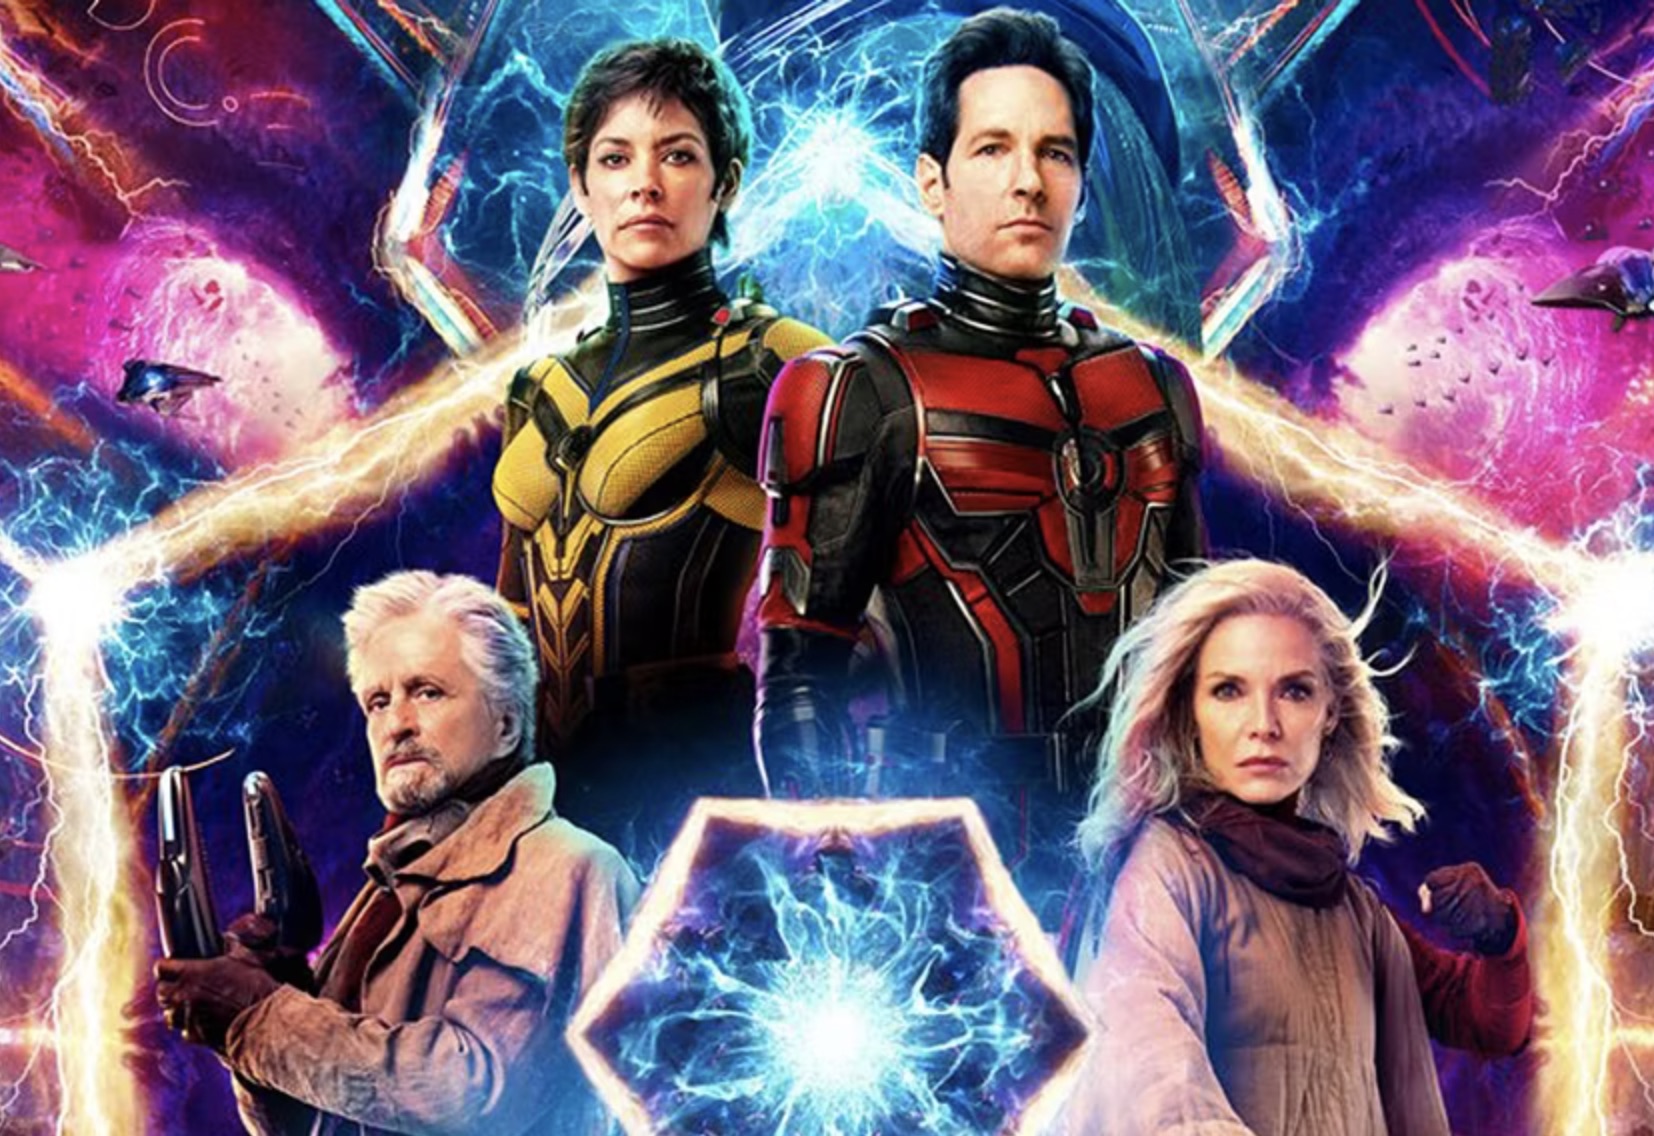 Ant-Man and the Wasp: Quantumania (2023) - Movie Review